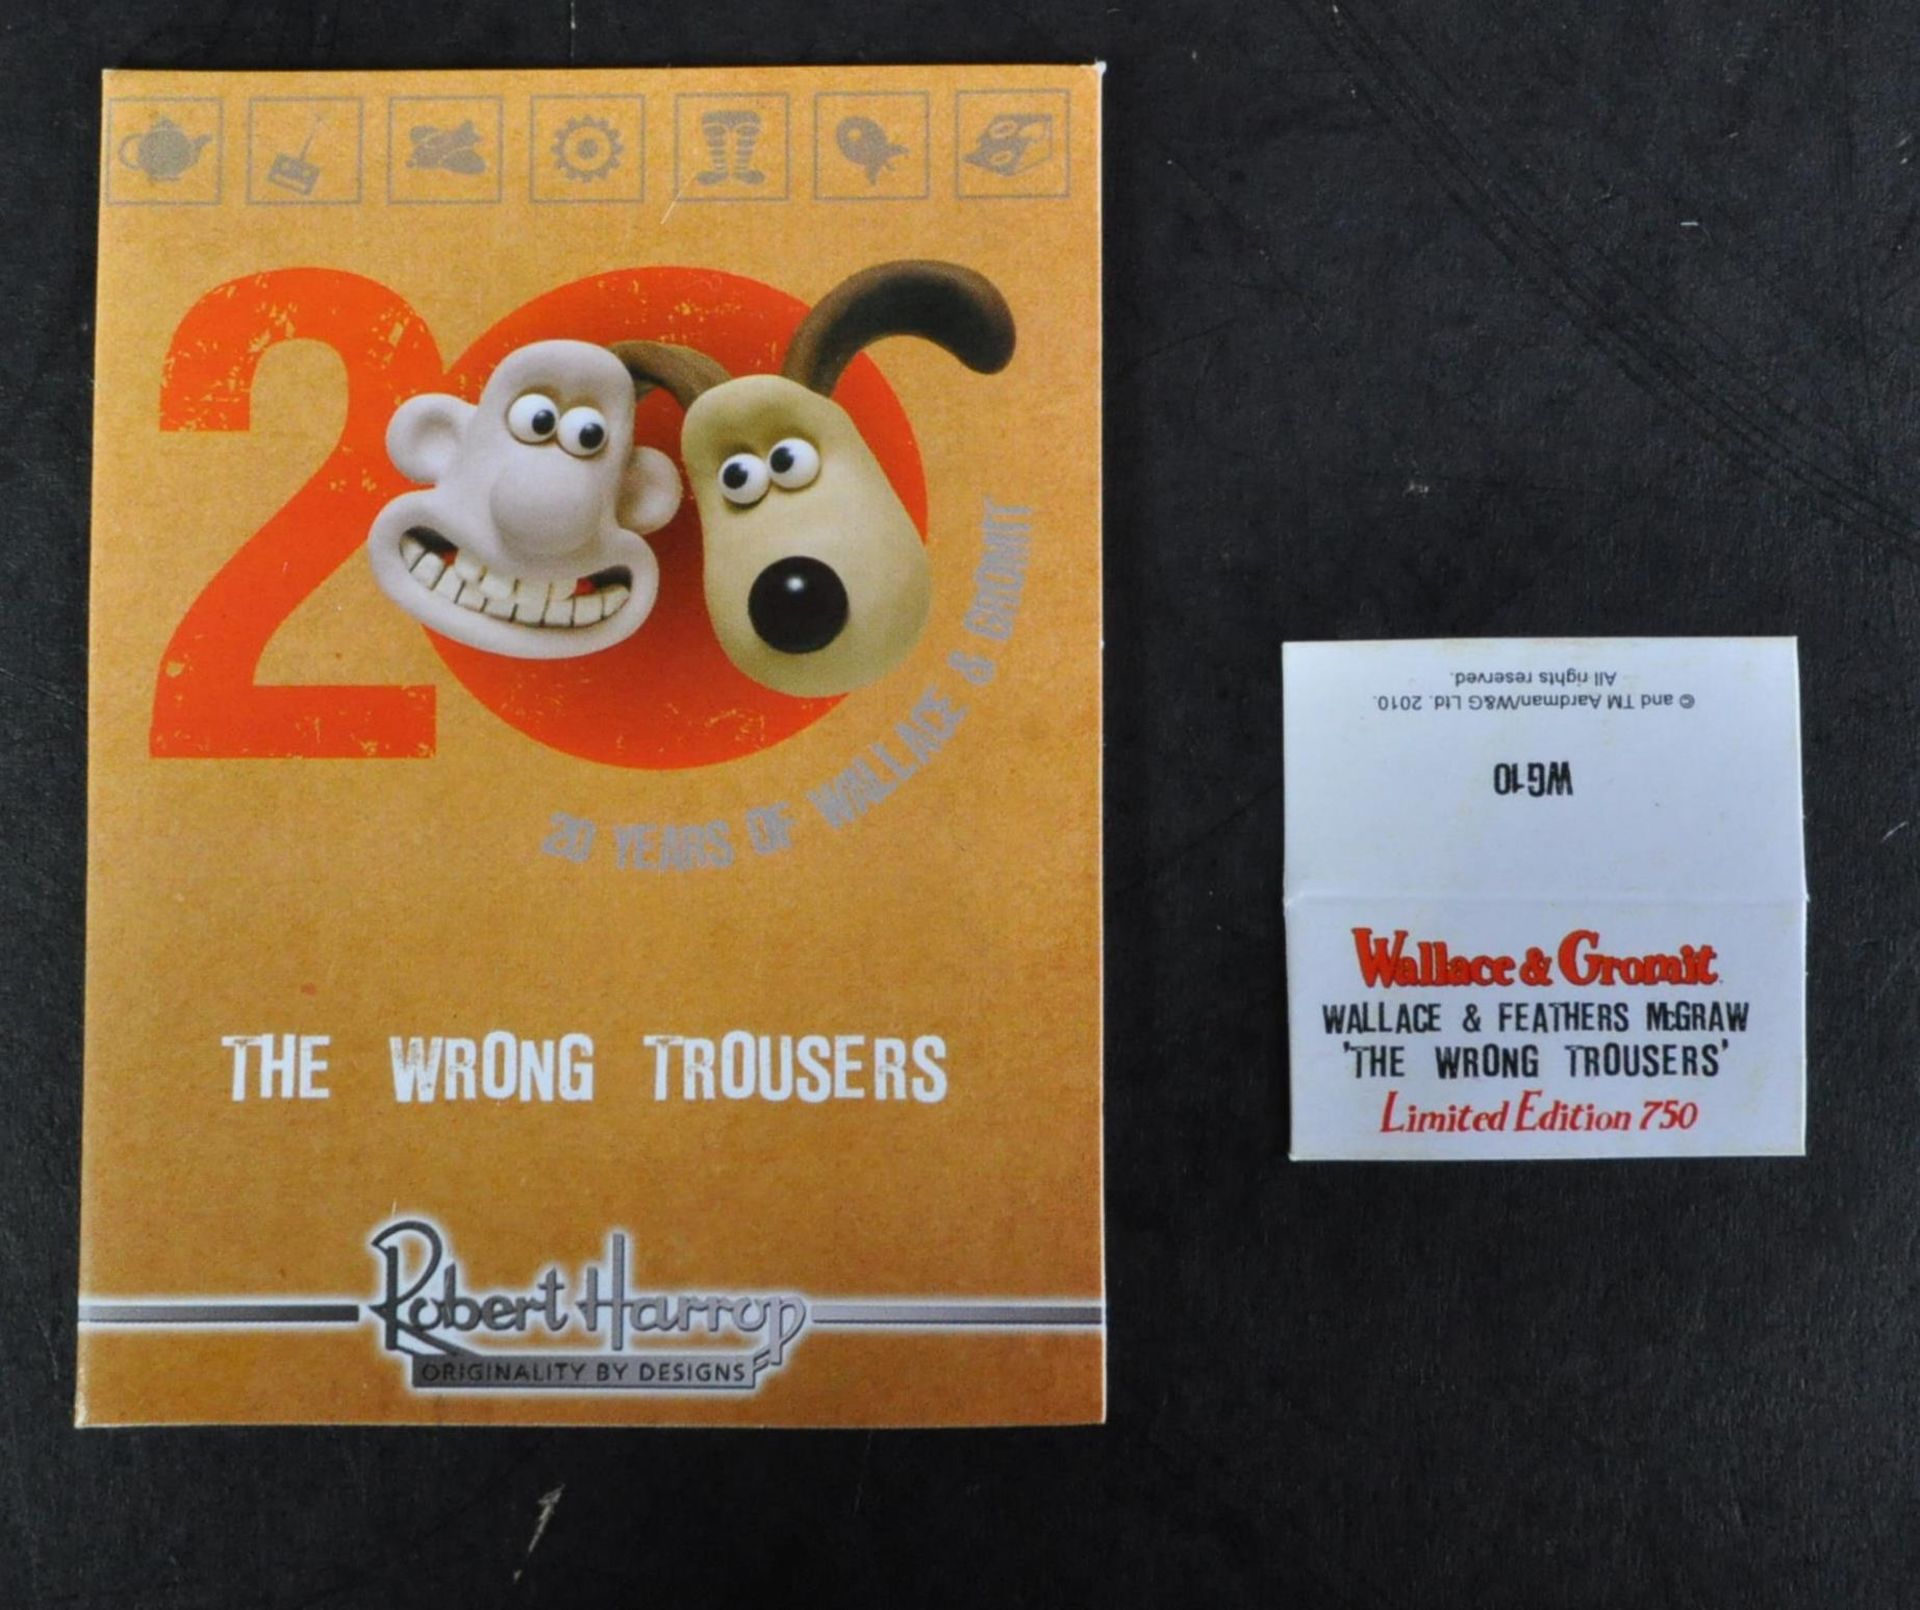 WALLACE & GROMIT - ROBERT HARROP - LIMITED EDITION FIGURINE - Image 6 of 6